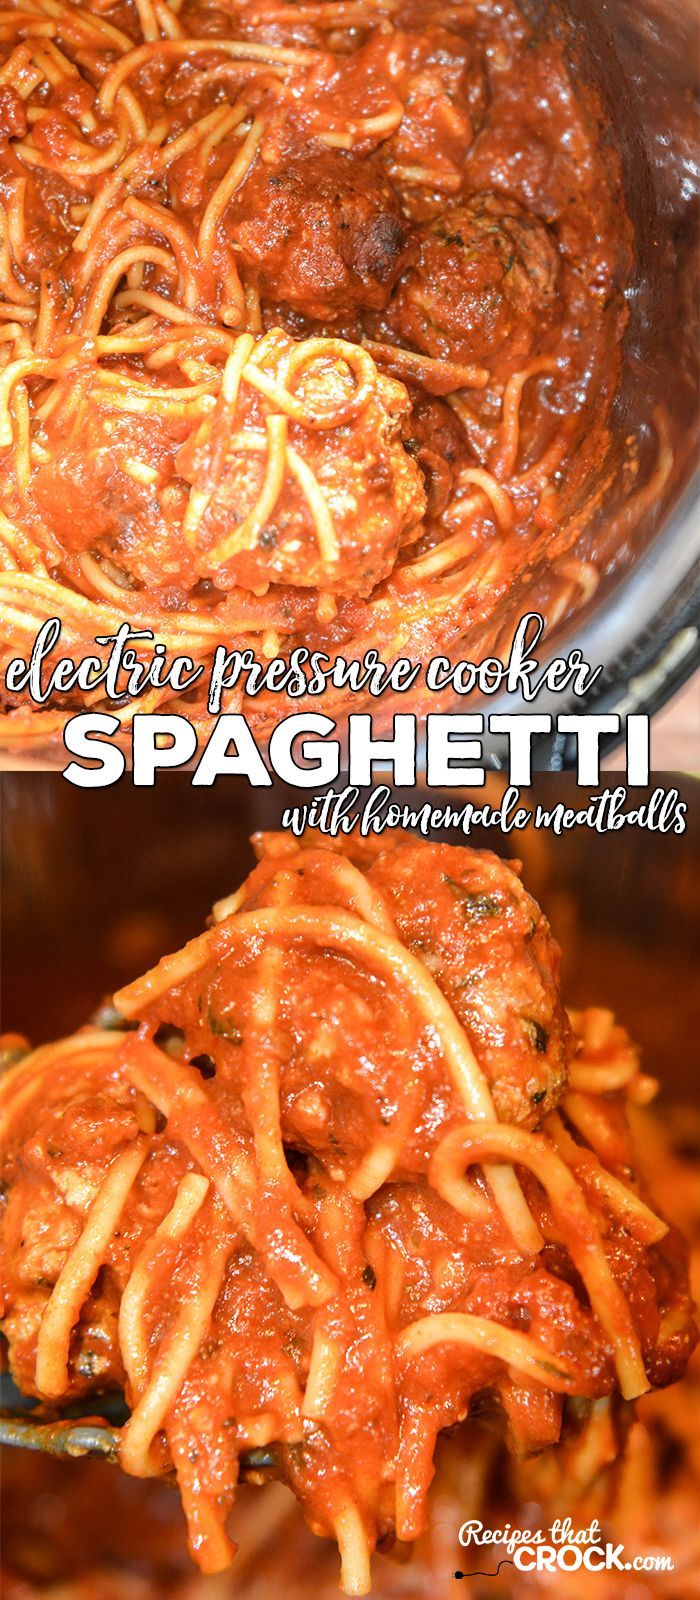 Are you looking for a good Electric Pressure Cooker Recipe for your Instant Pot? Our Electric Pressure Cooker Spaghetti with